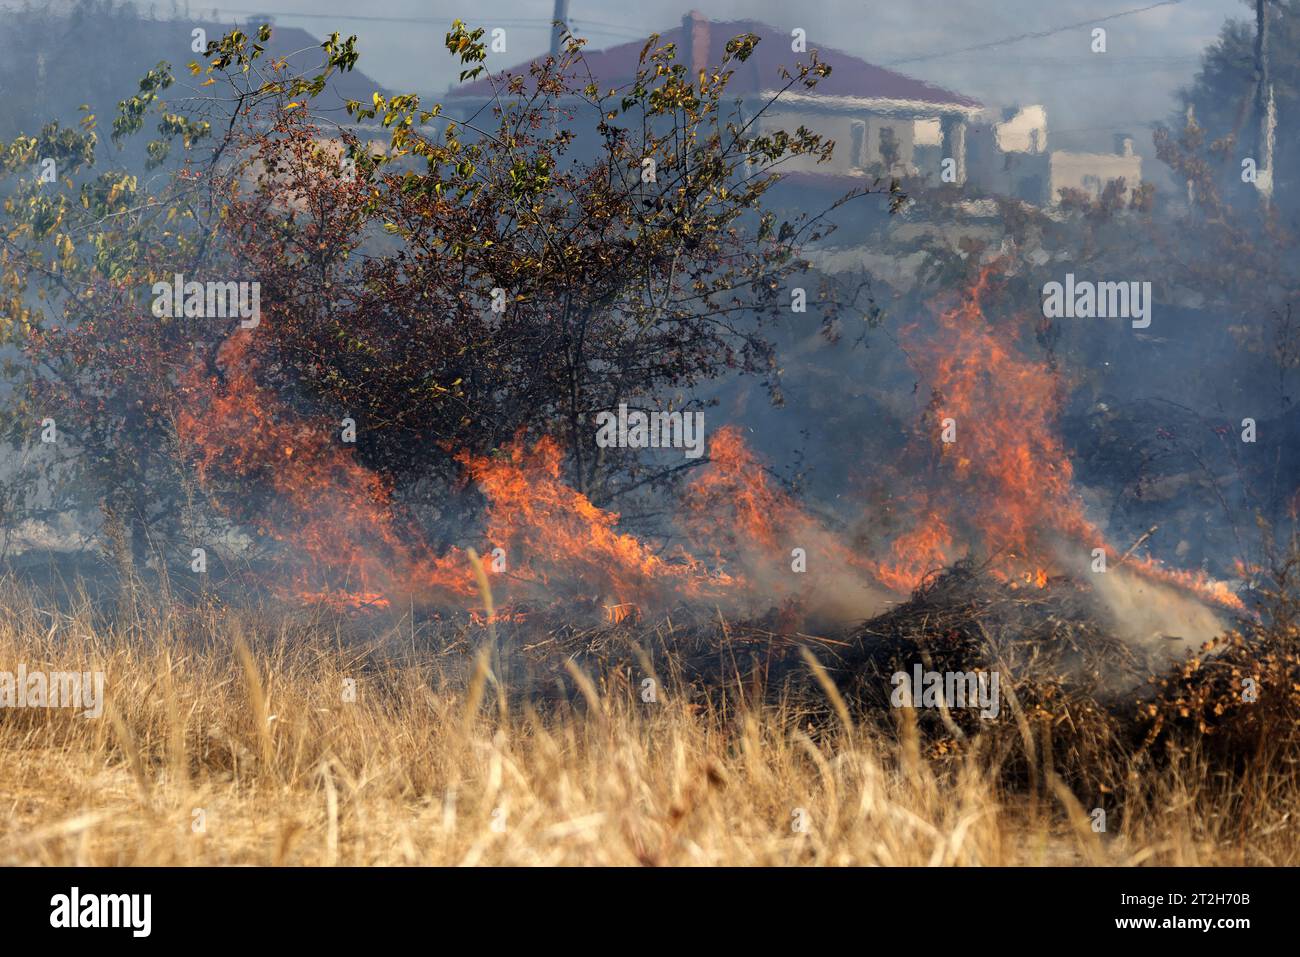 steppe fires during severe drought completely destroy fields. Disaster causes regular damage to environment and economy of region. The fire threatens Stock Photo